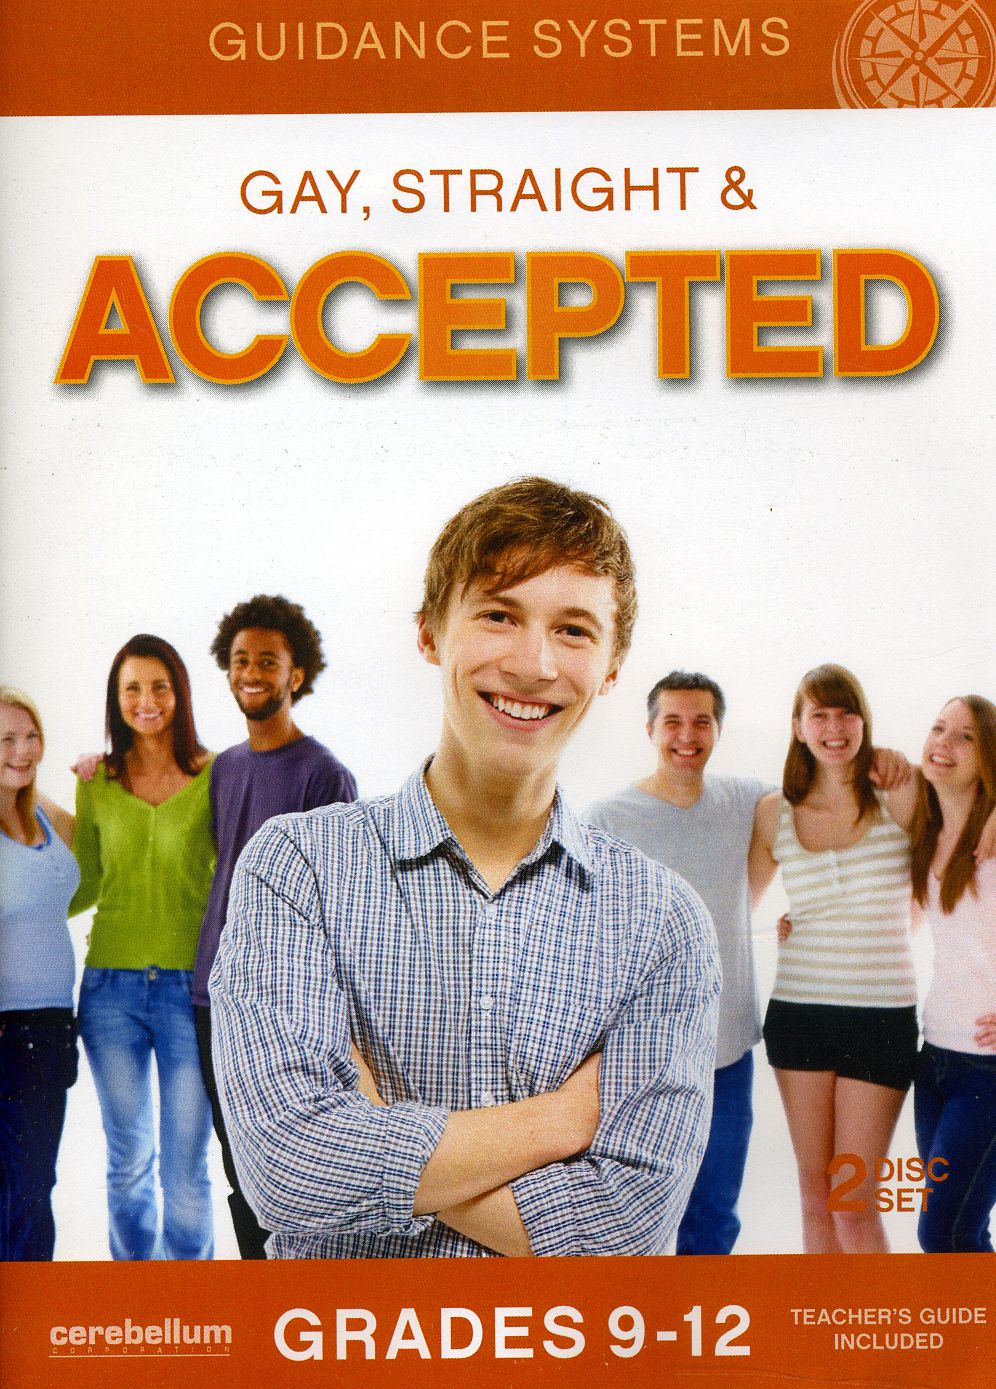 GAY STRAIGHT & ACCEPTED (2PC)